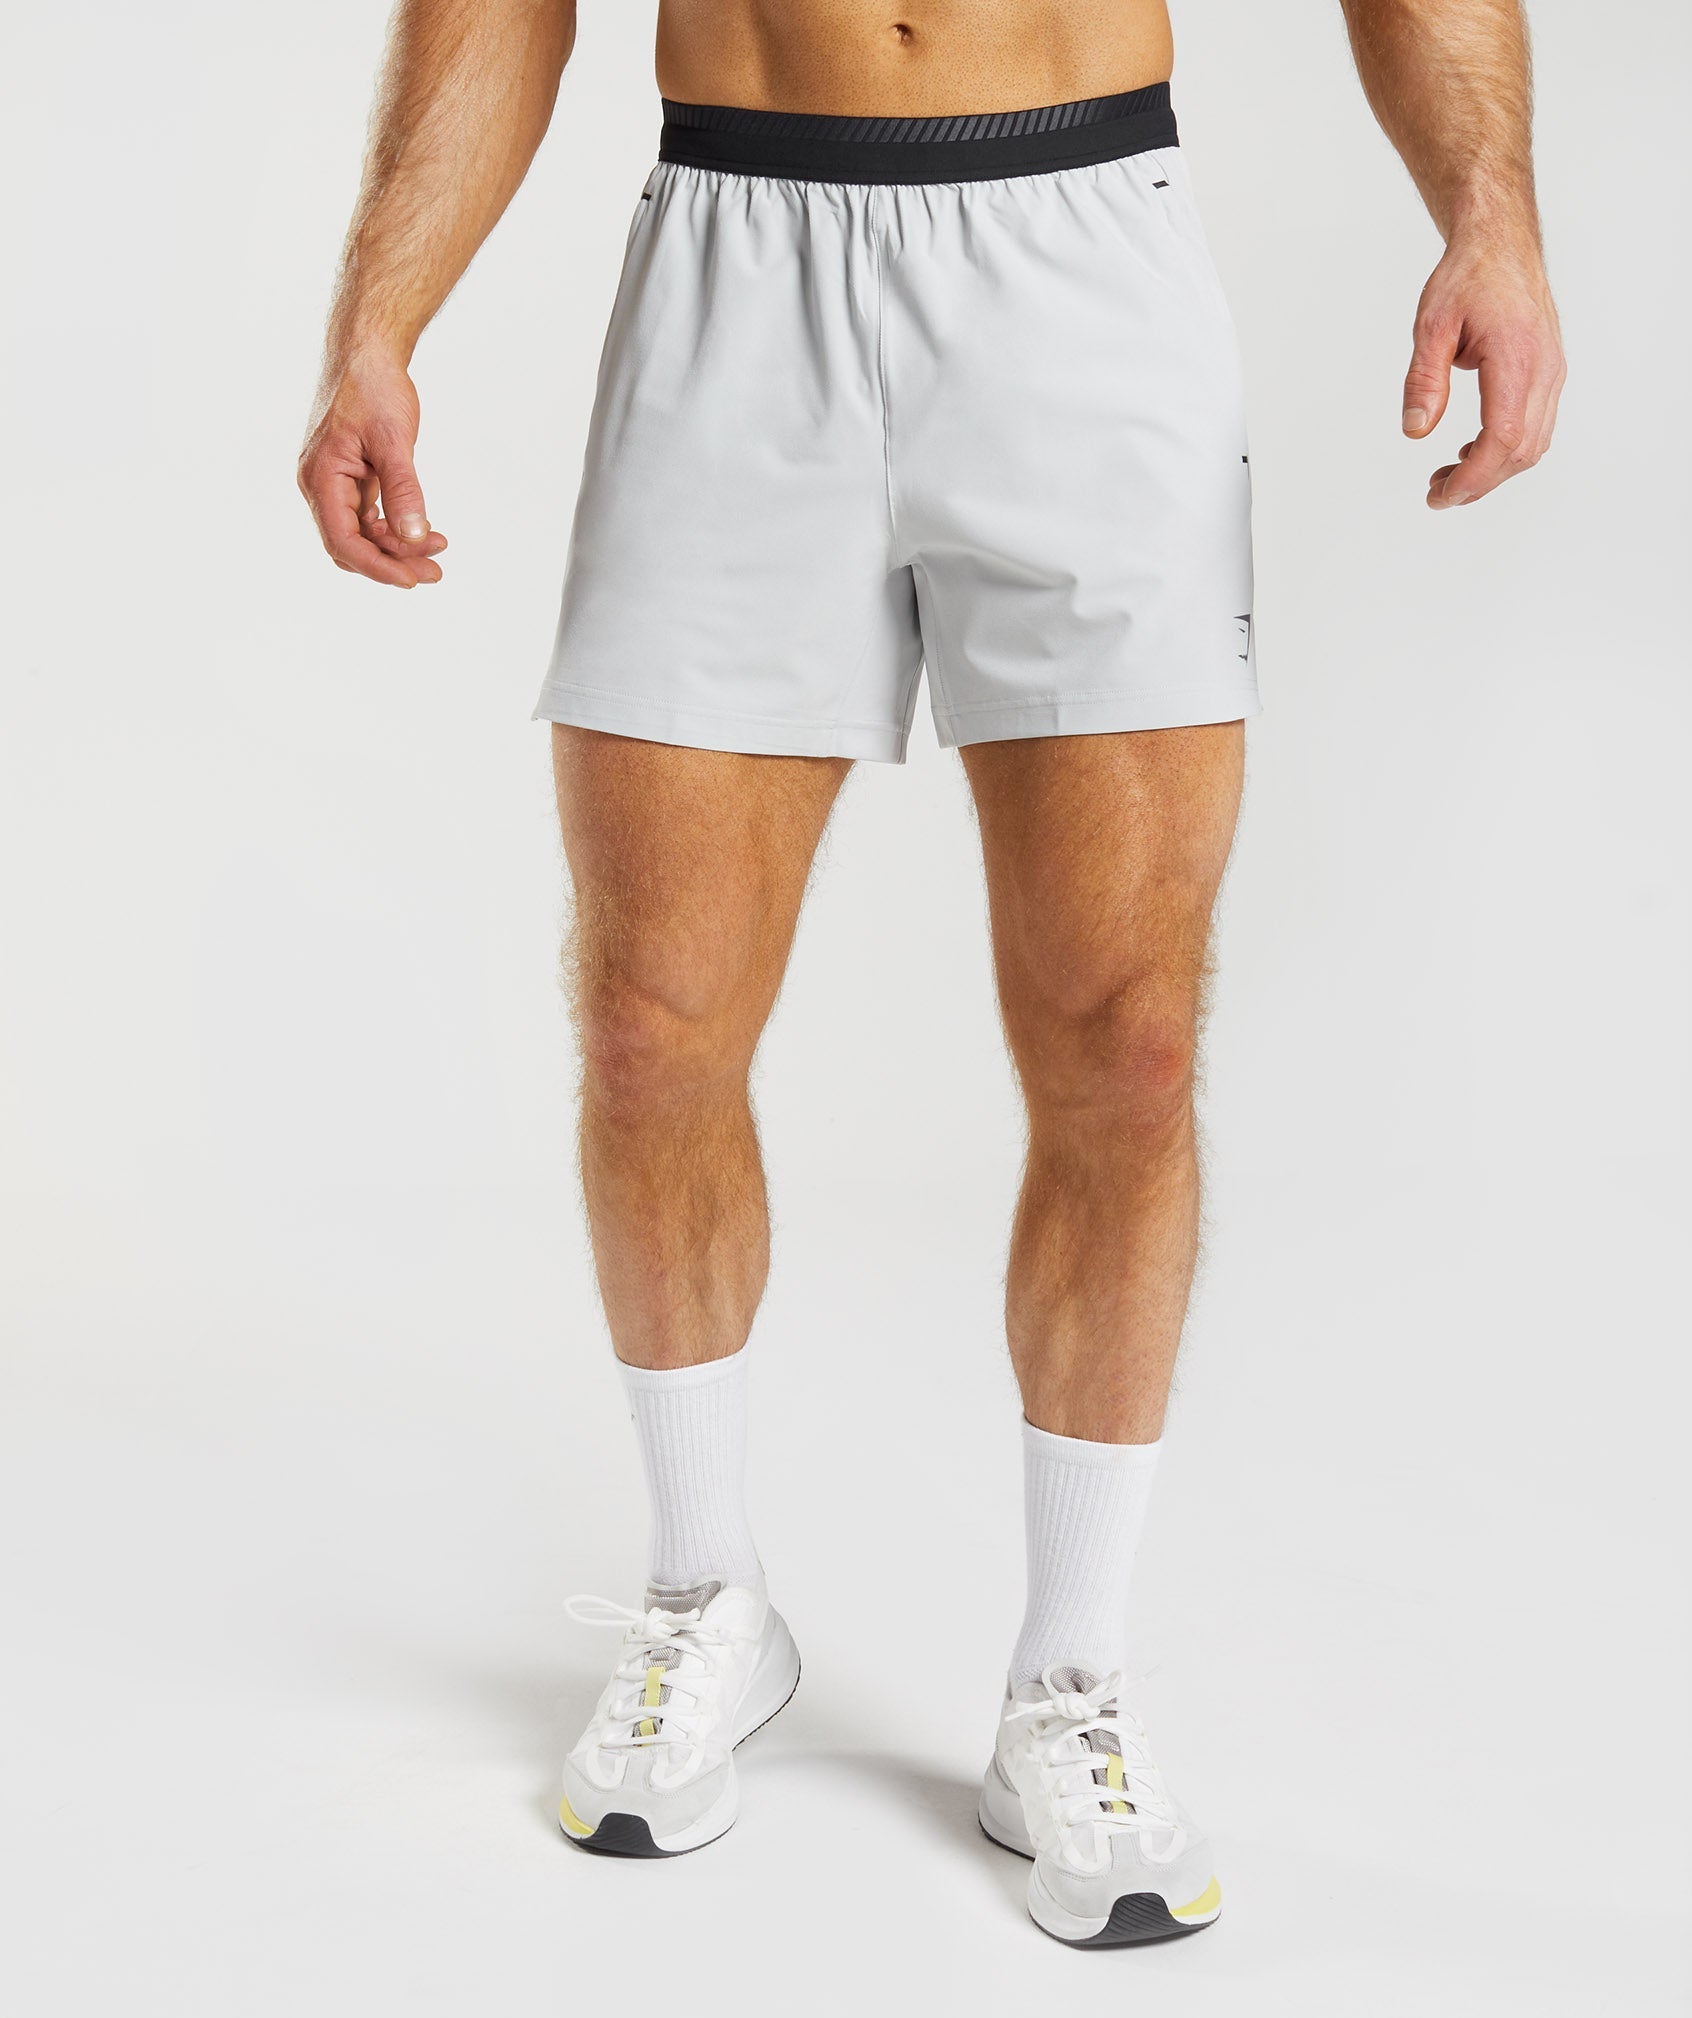 Apex 5" Hybrid Shorts in {{variantColor} is out of stock